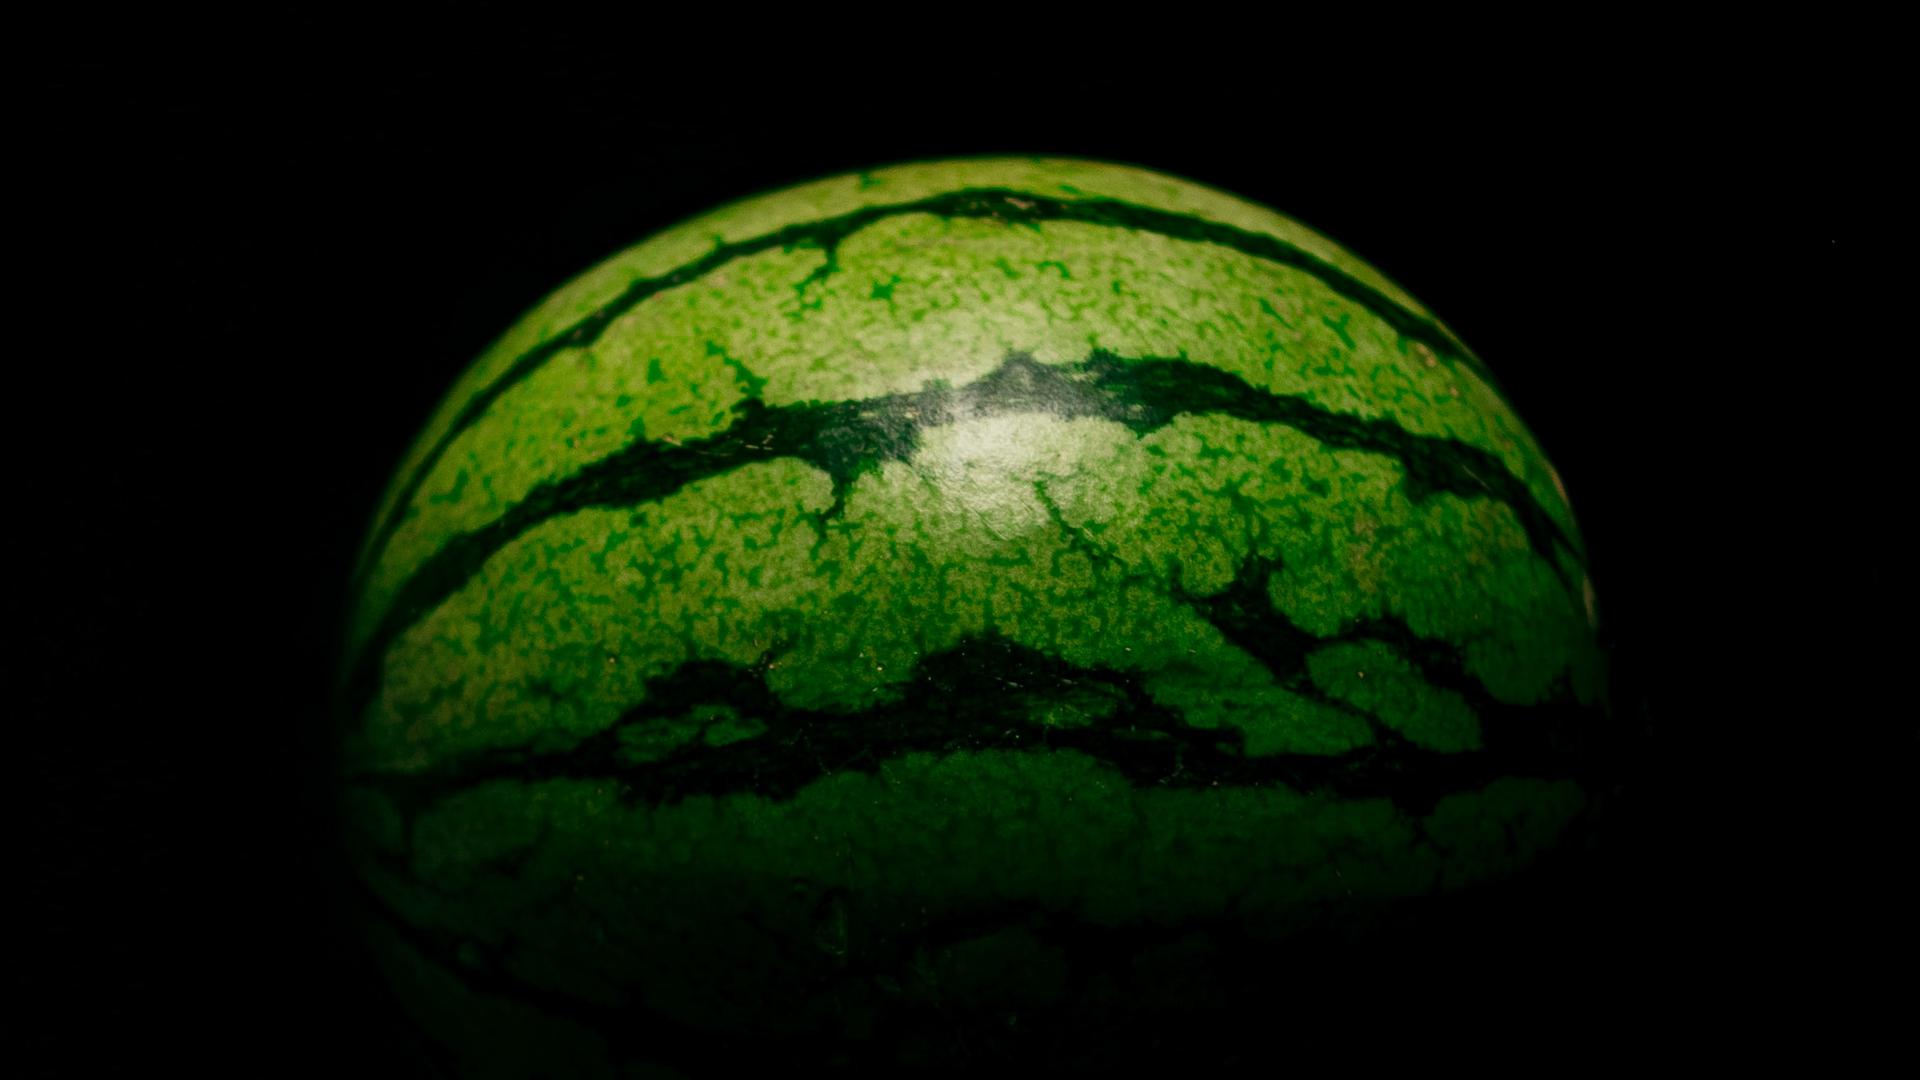 A watermelon on its side to show the basics of horizontal ellipsoids.